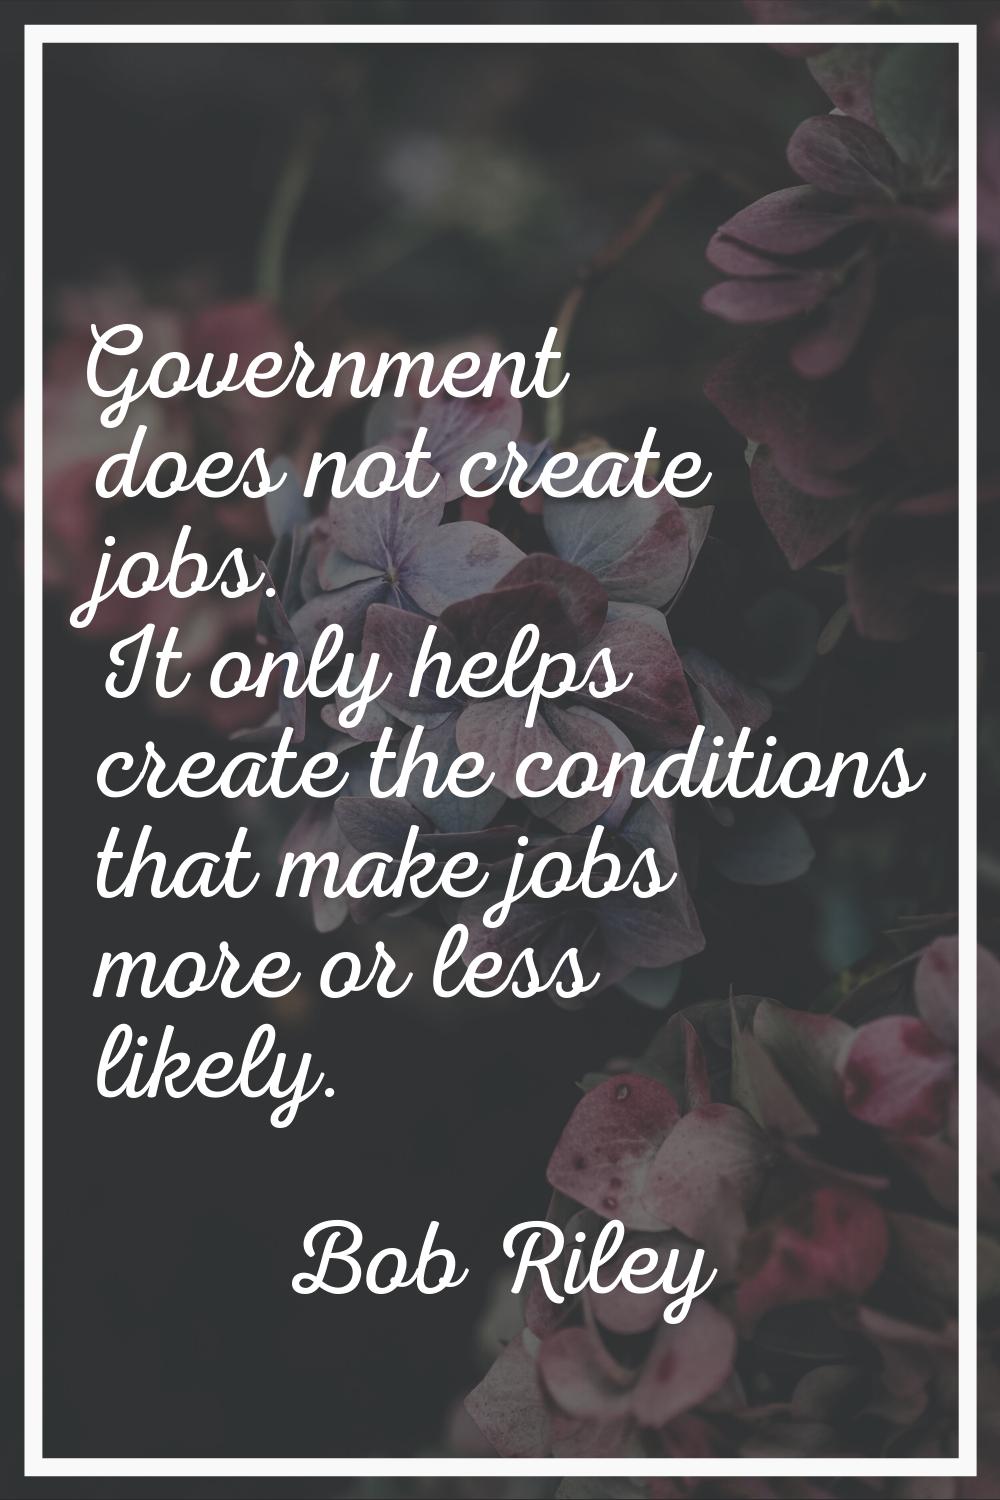 Government does not create jobs. It only helps create the conditions that make jobs more or less li